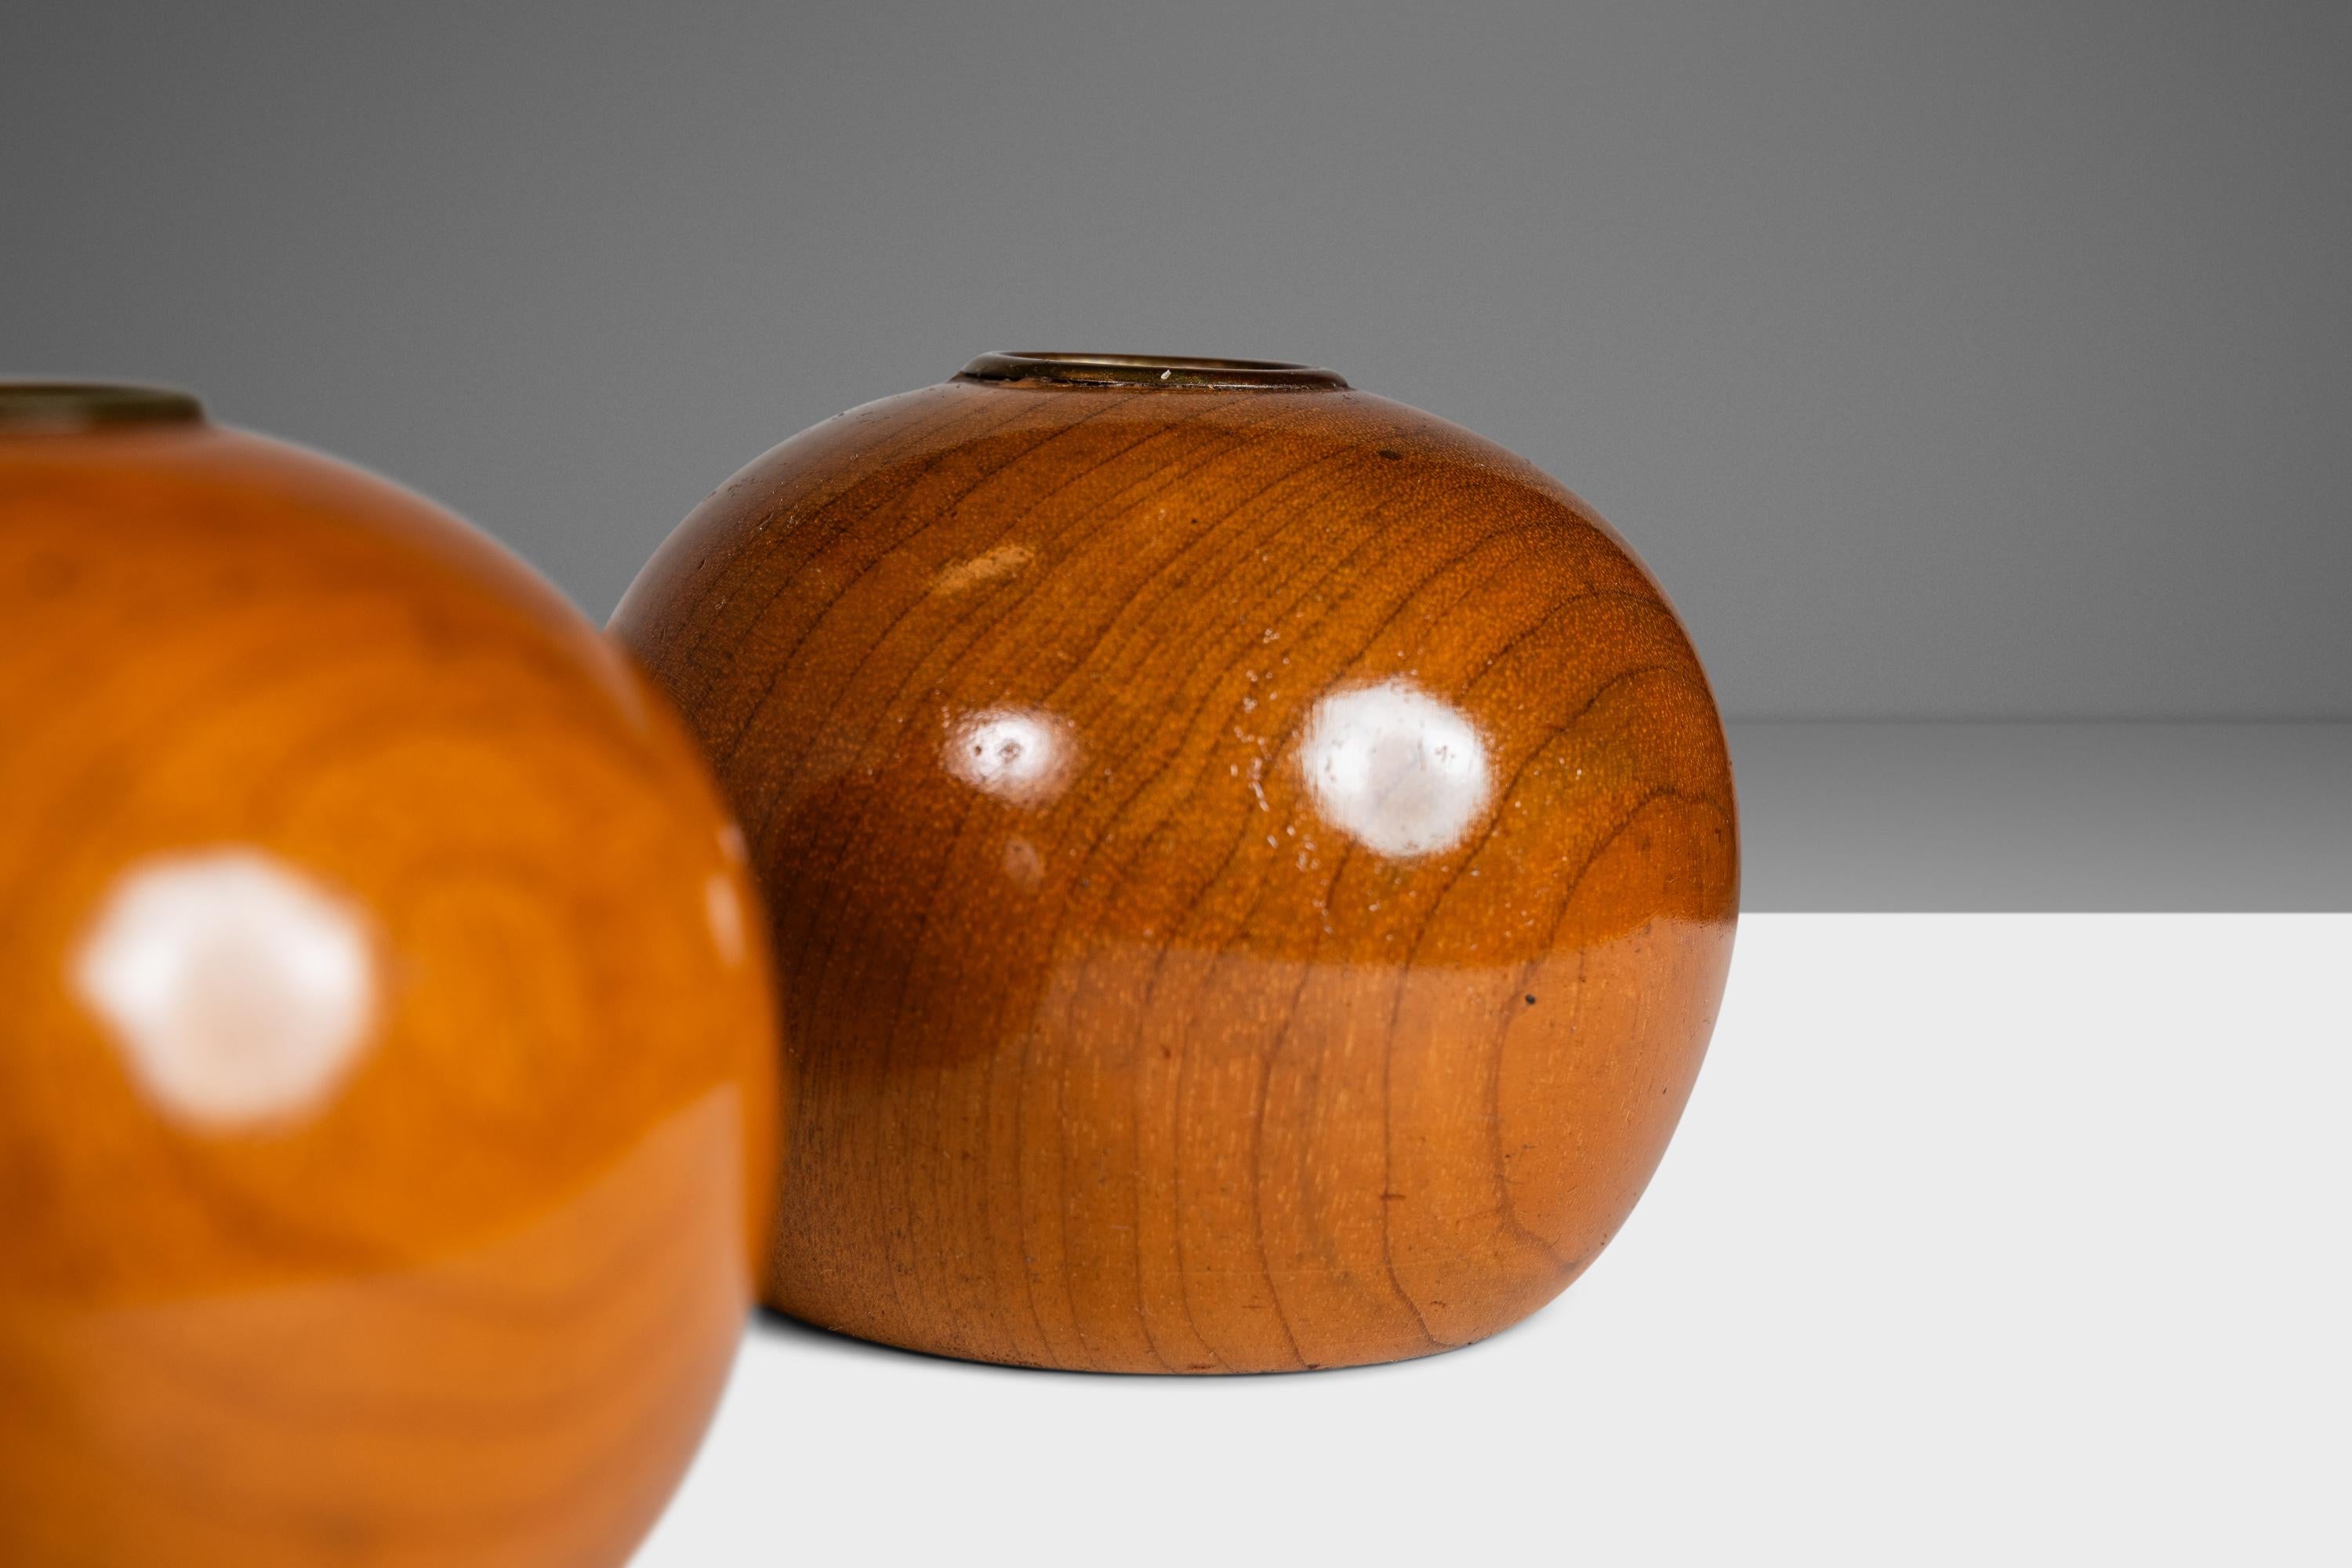 American Mid-Century Wood-Turned Candle Stick Holders in Oregon Myrtlewood, USA, c. 1970s For Sale